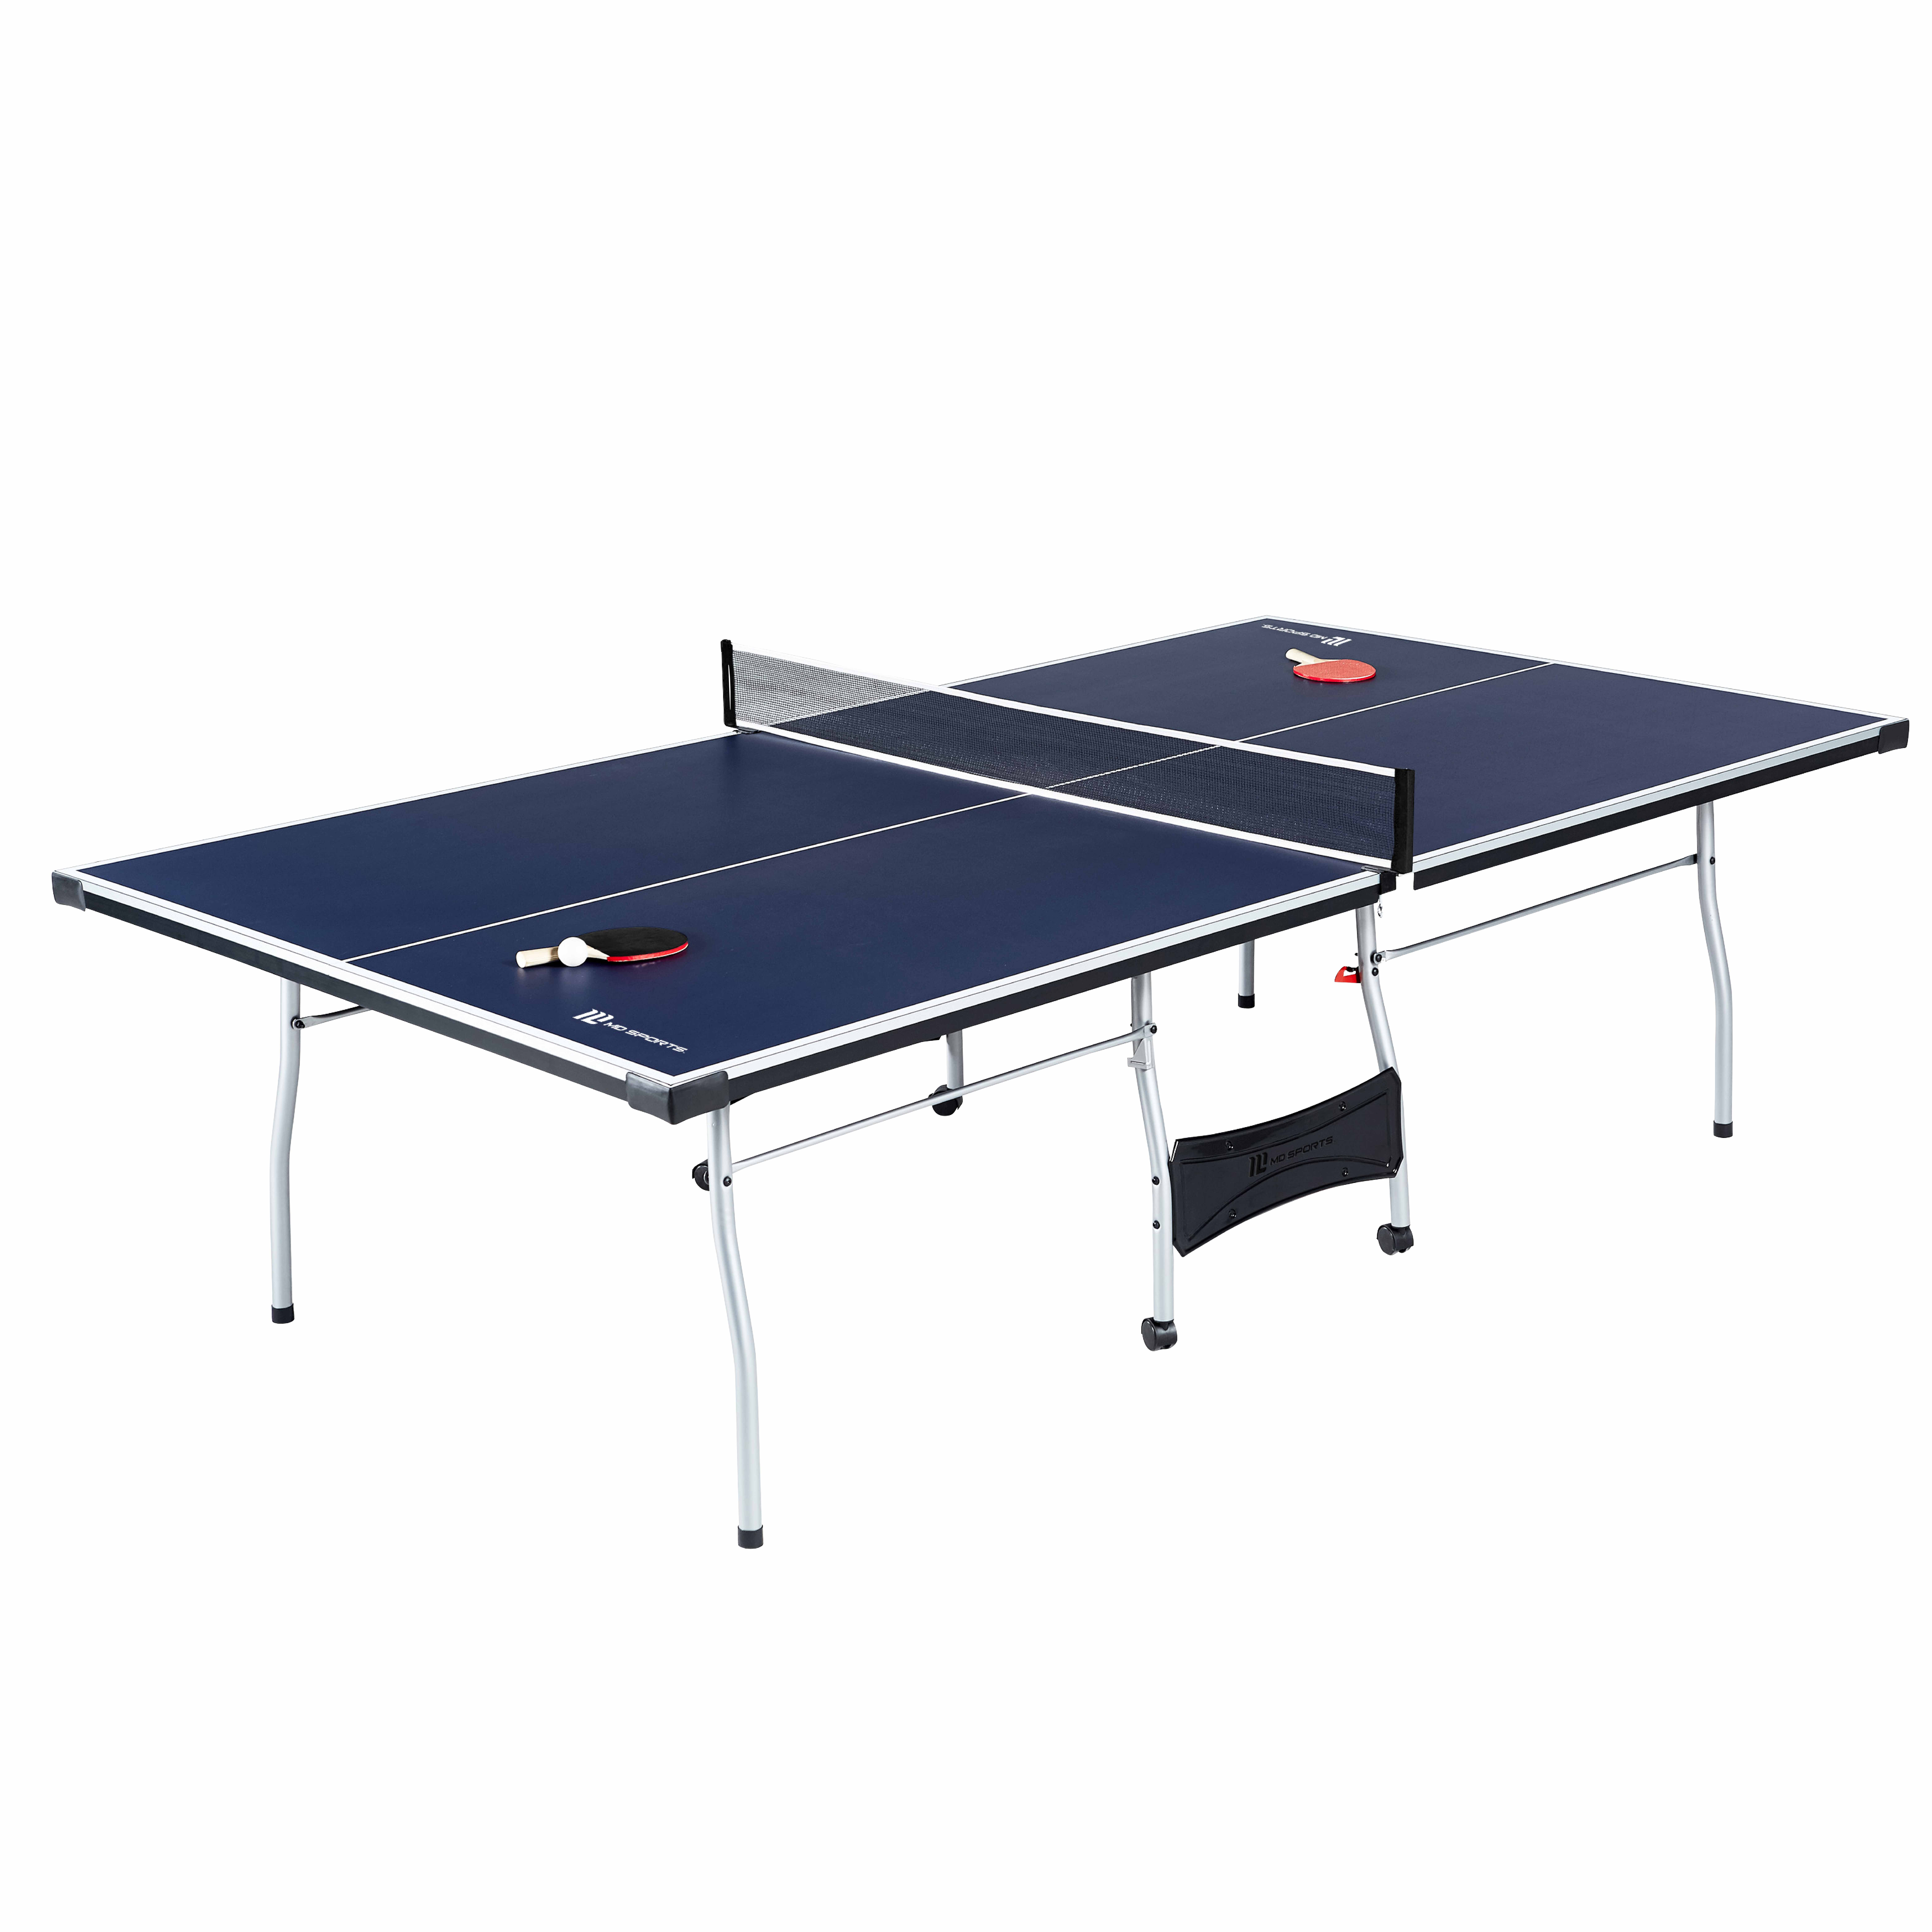 MD Sports Official Size 15 mm 4 Piece Indoor Table Tennis, Accessories Included - image 1 of 13